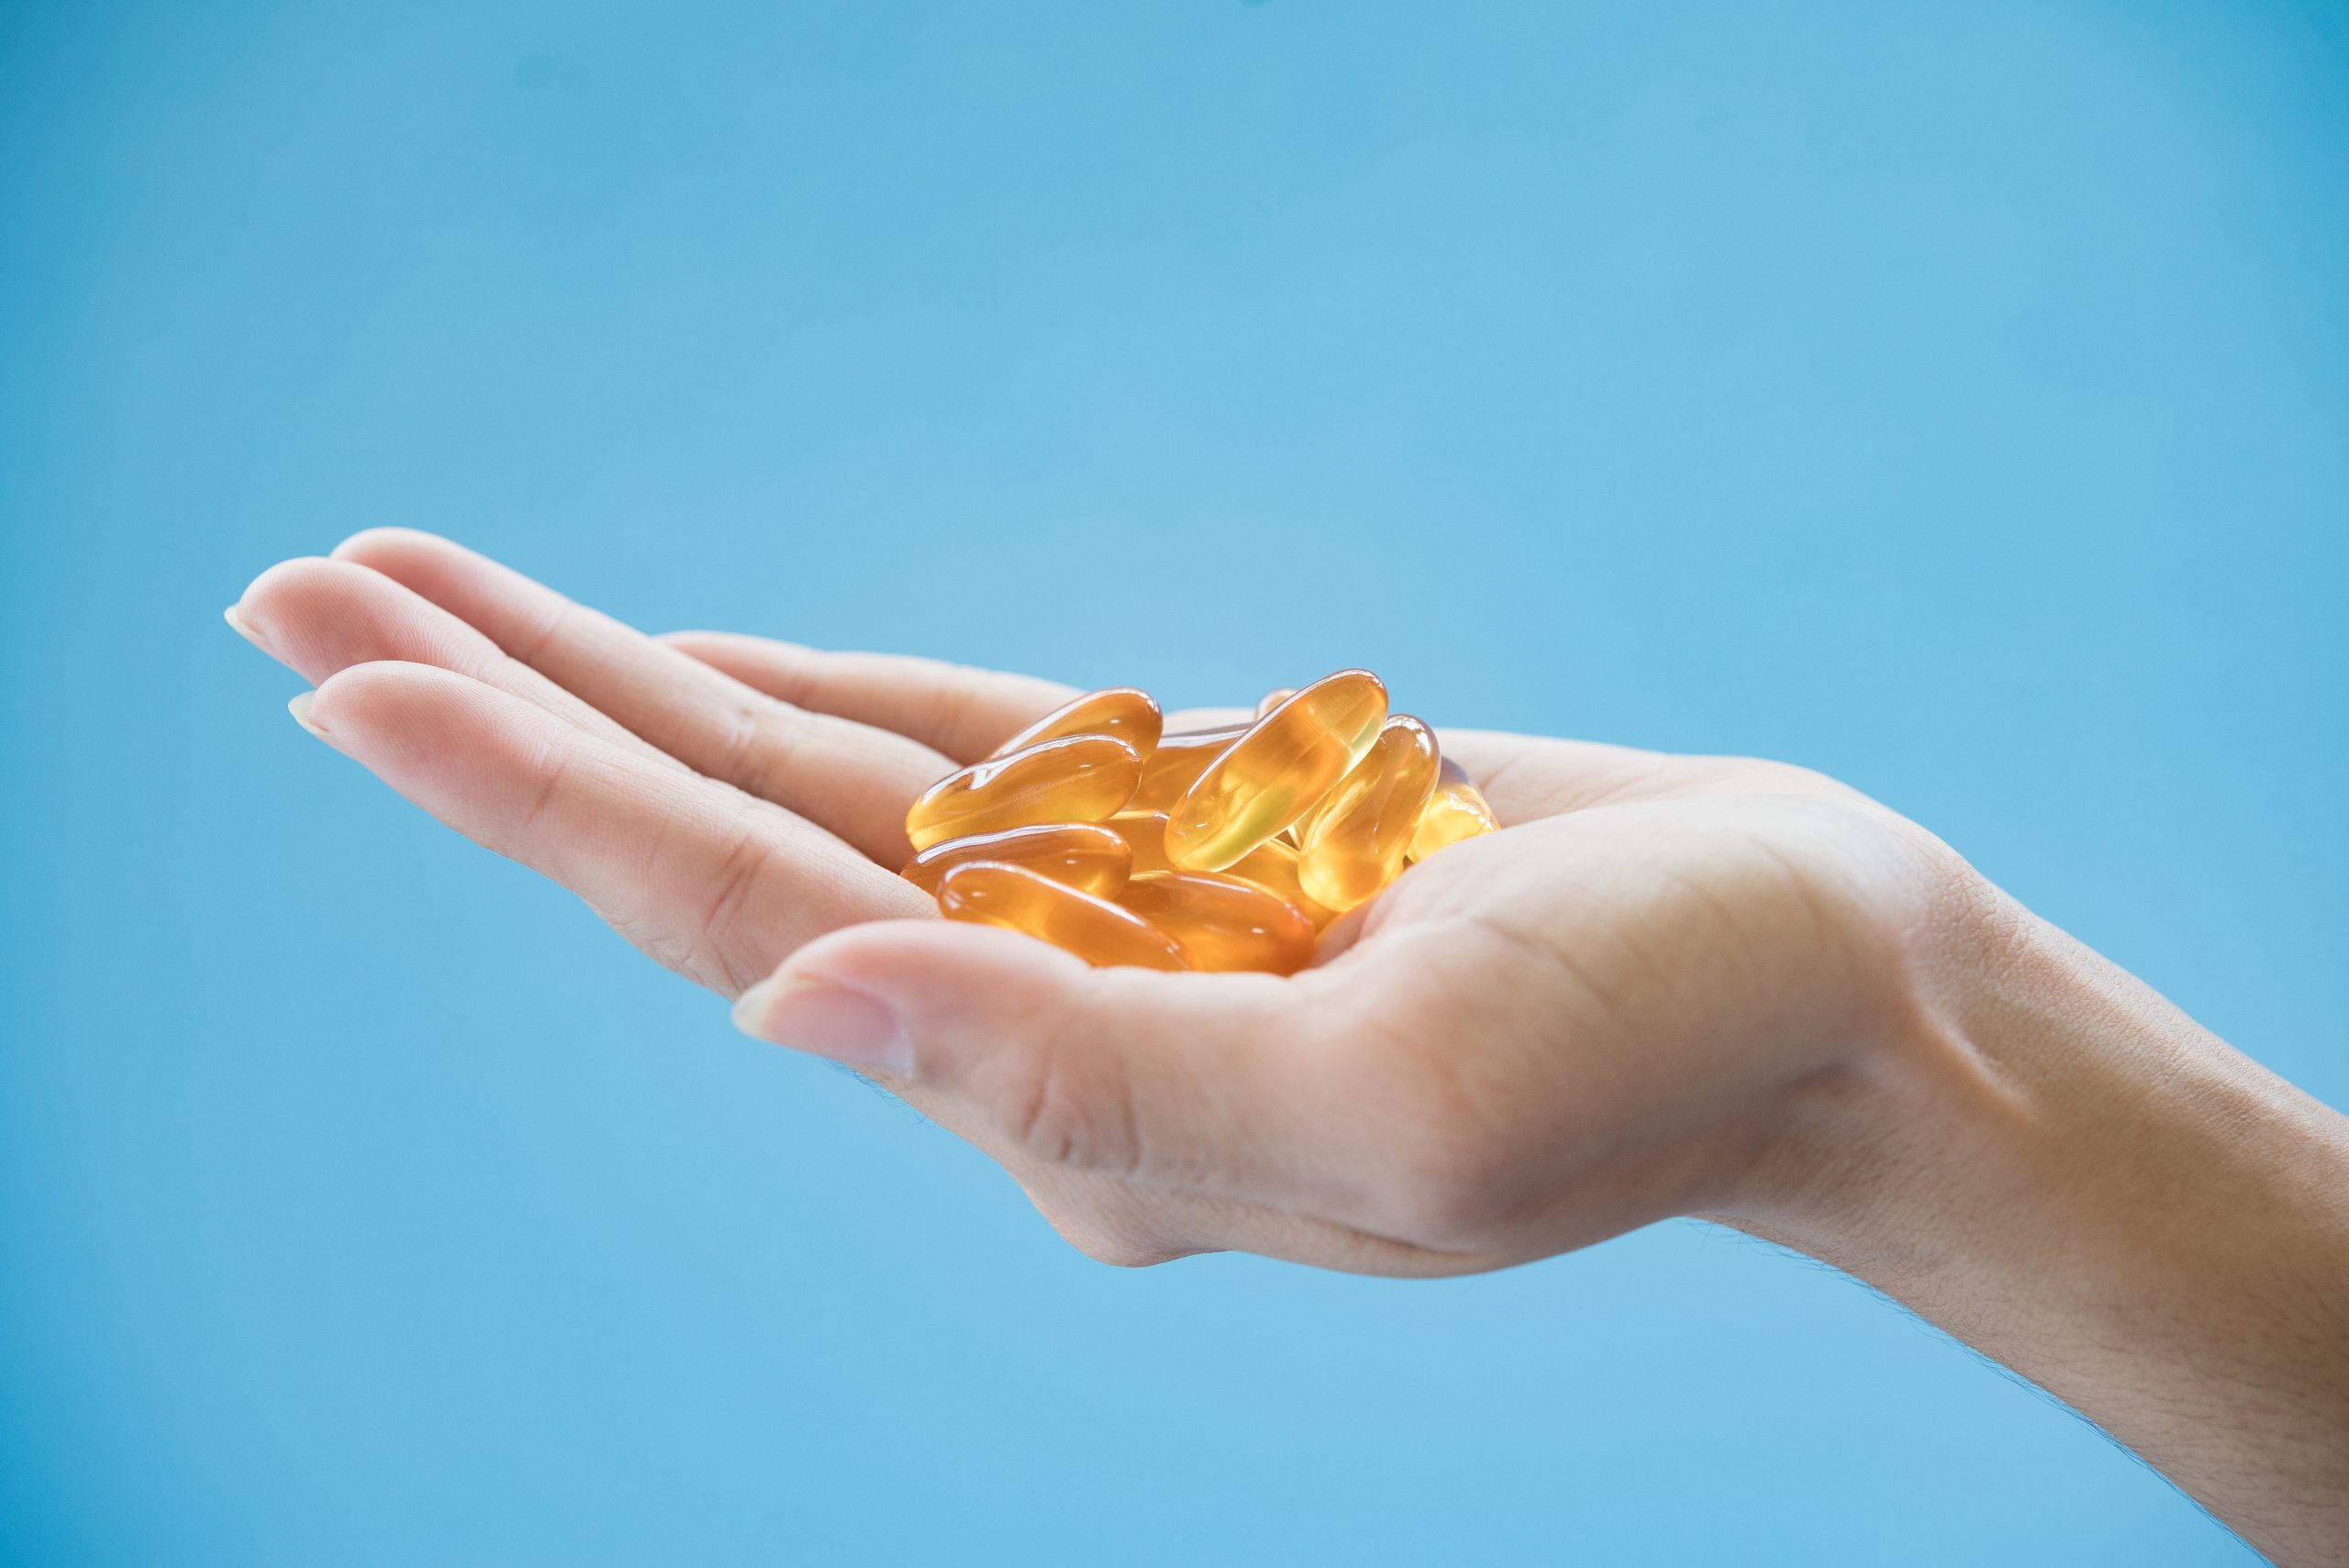 Omega-3 supplements in the palm of a hand.